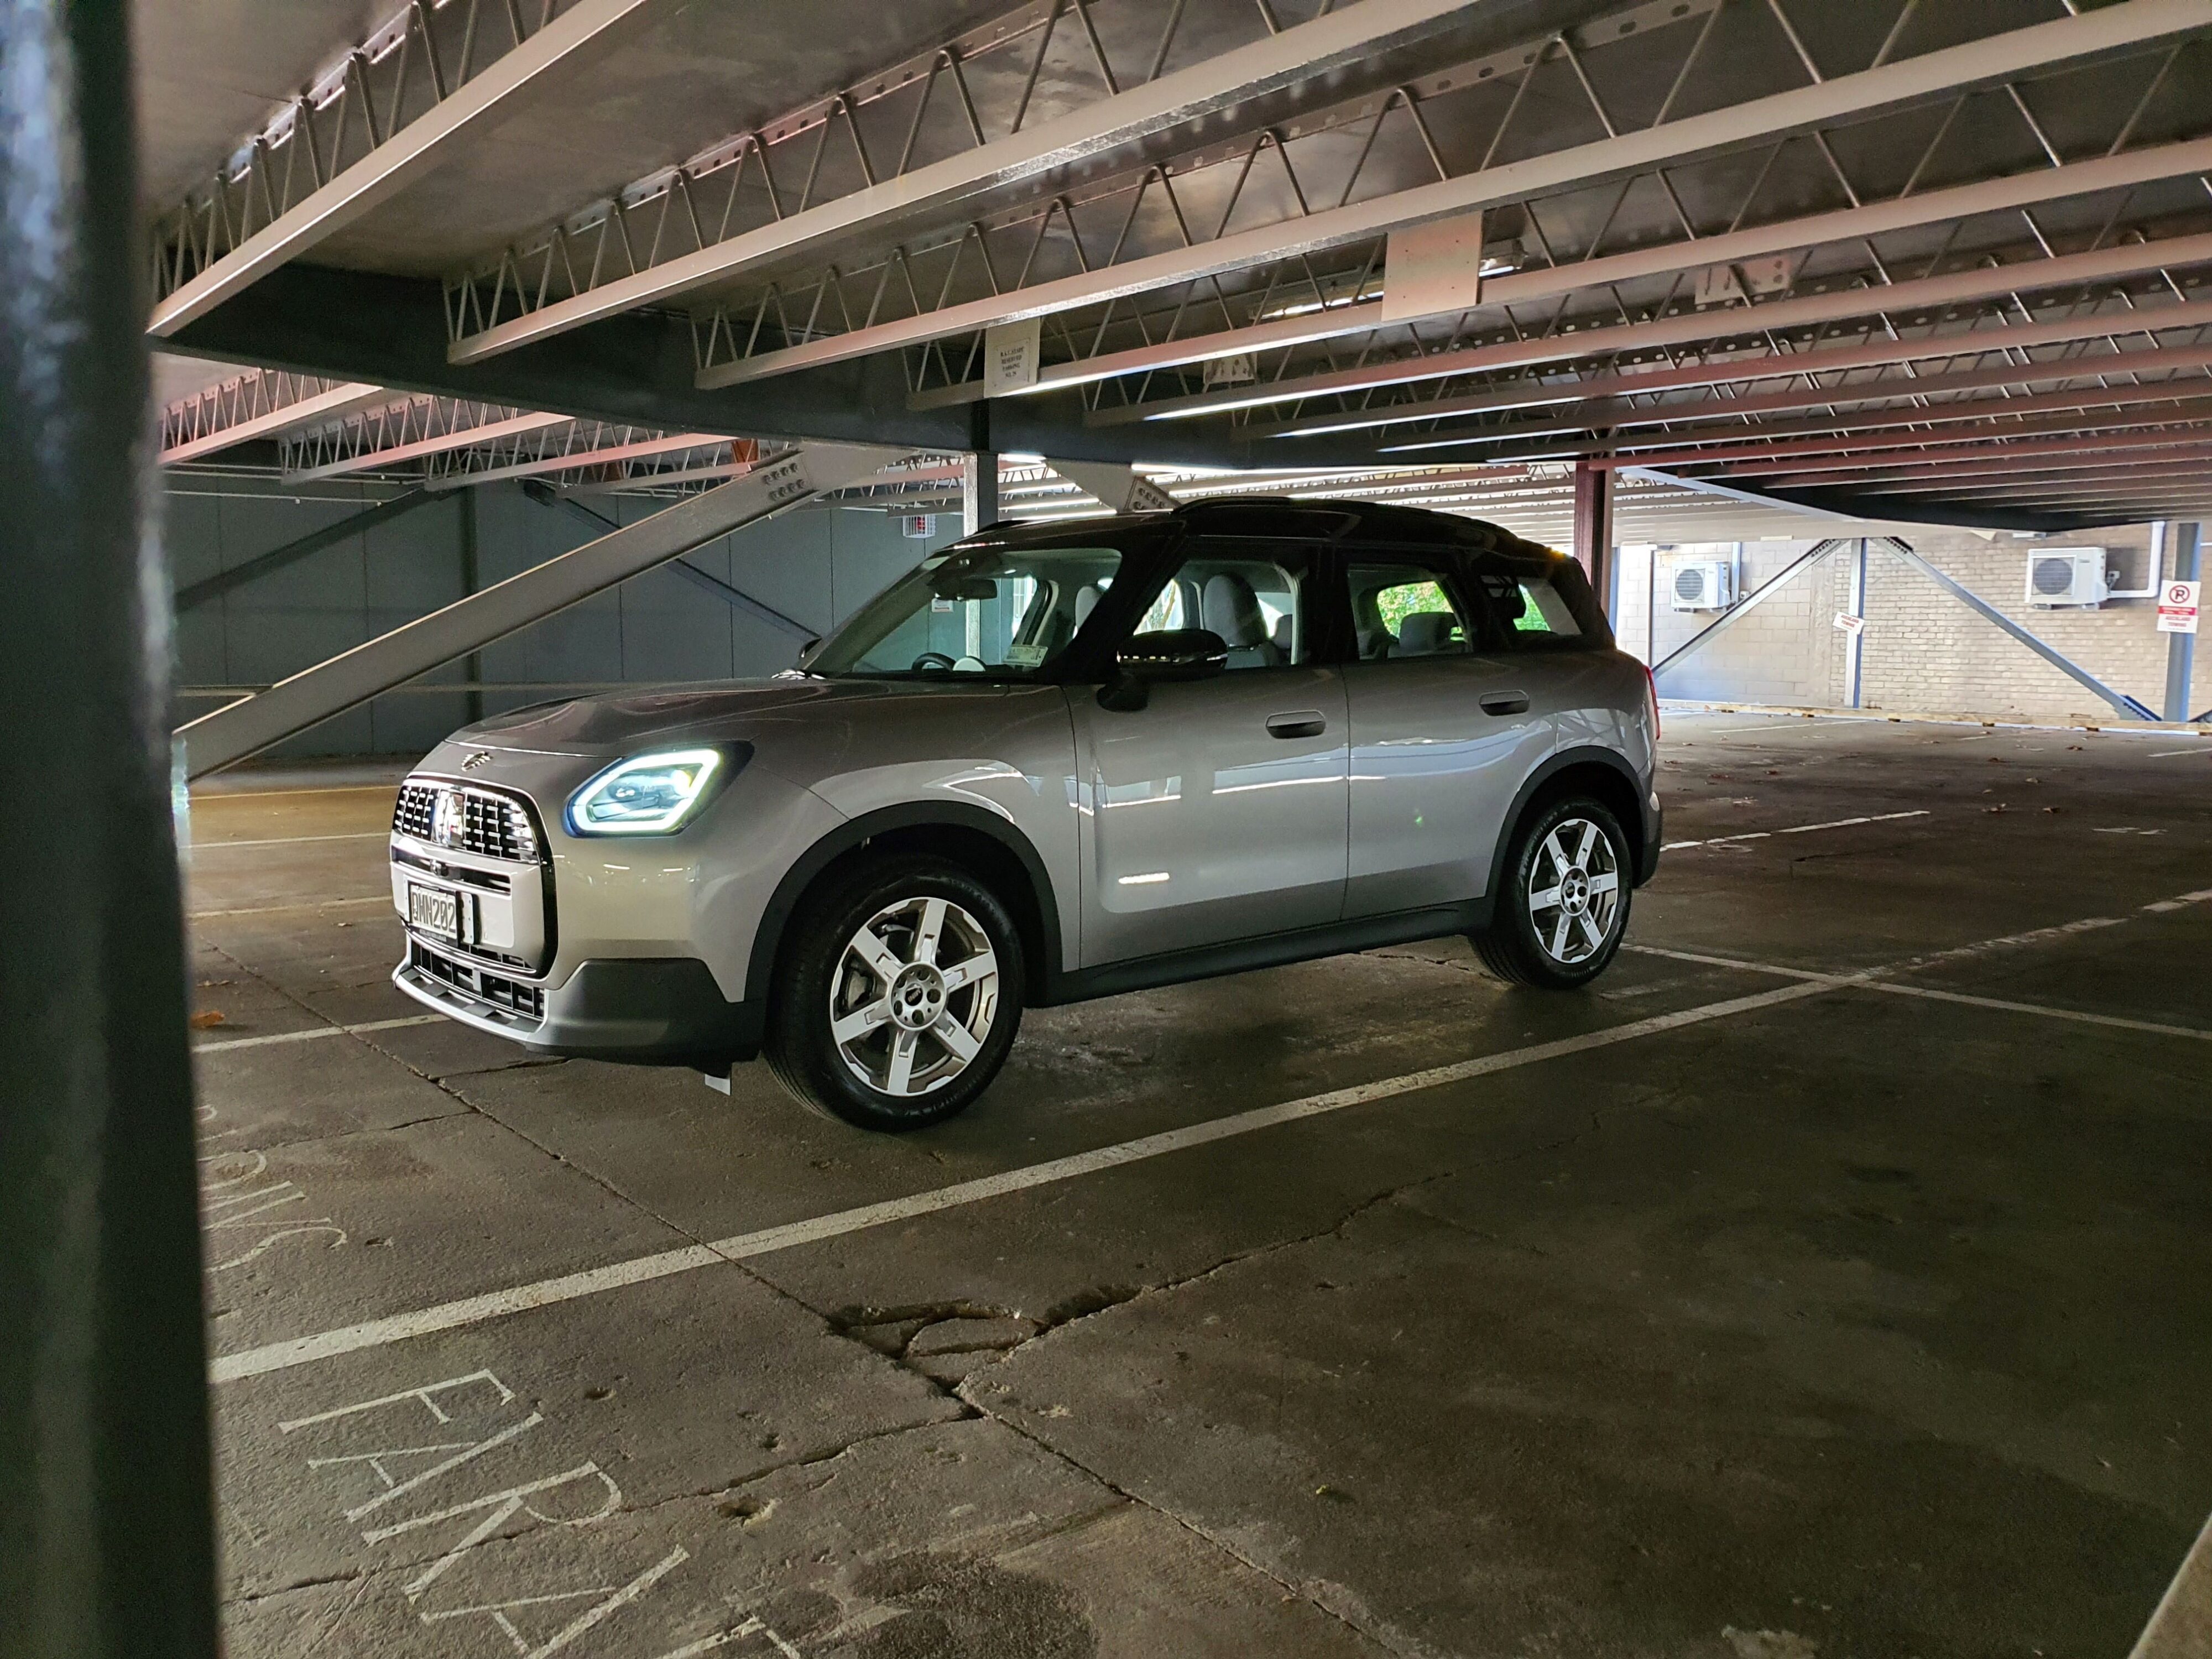 Front three quarters view of a 2024 Mini Countryman C Classic in Silver in an underground carpark.